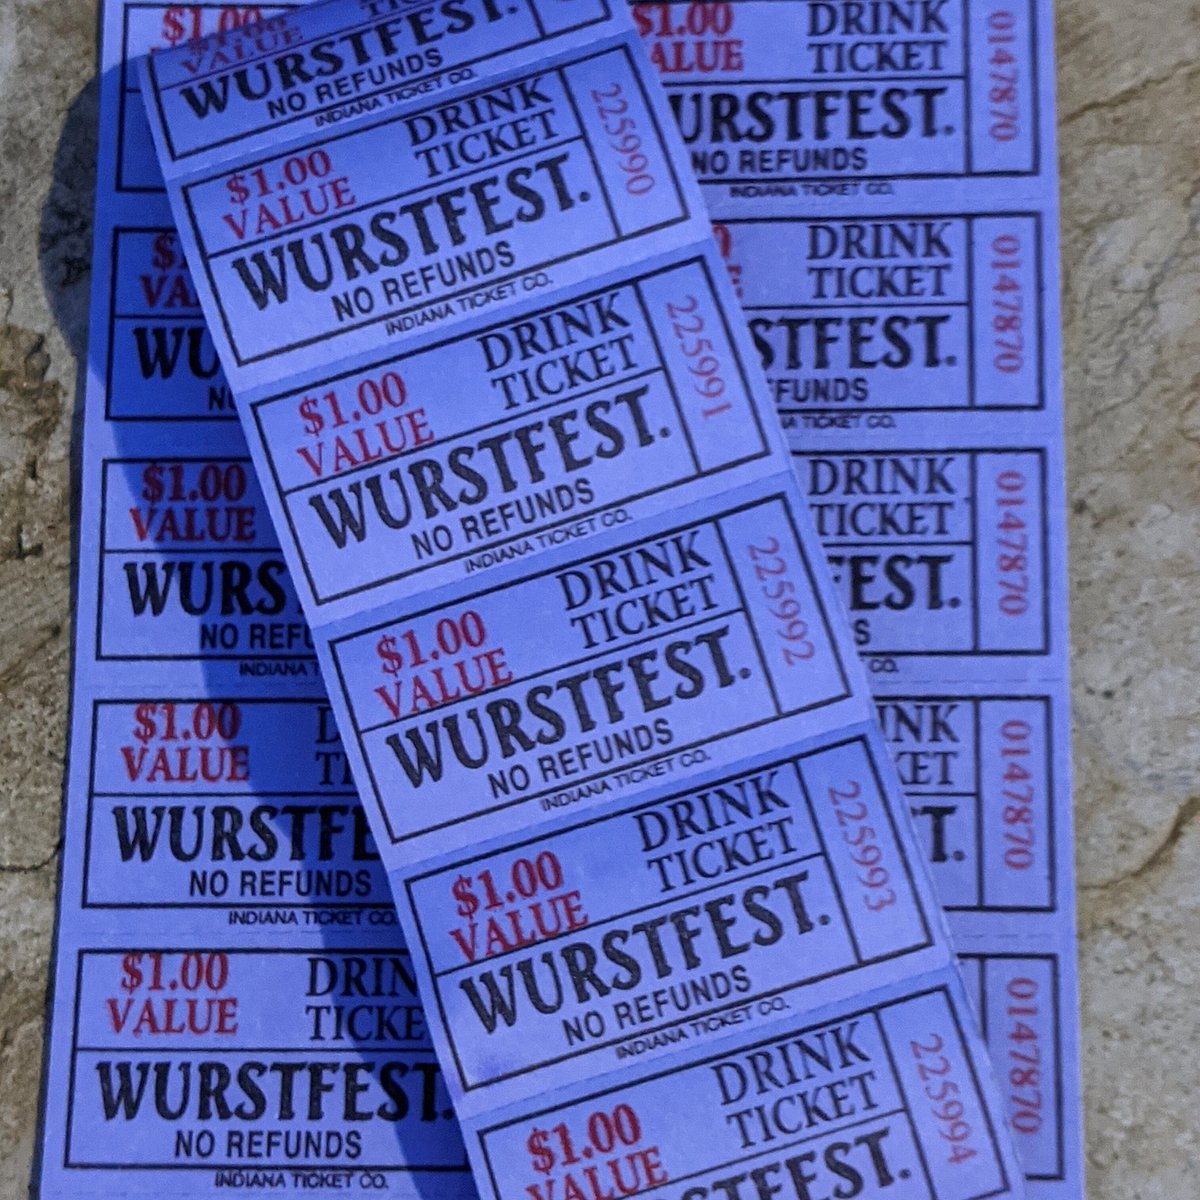 WURSTFEST - All You Need to Know BEFORE You Go (with Photos)